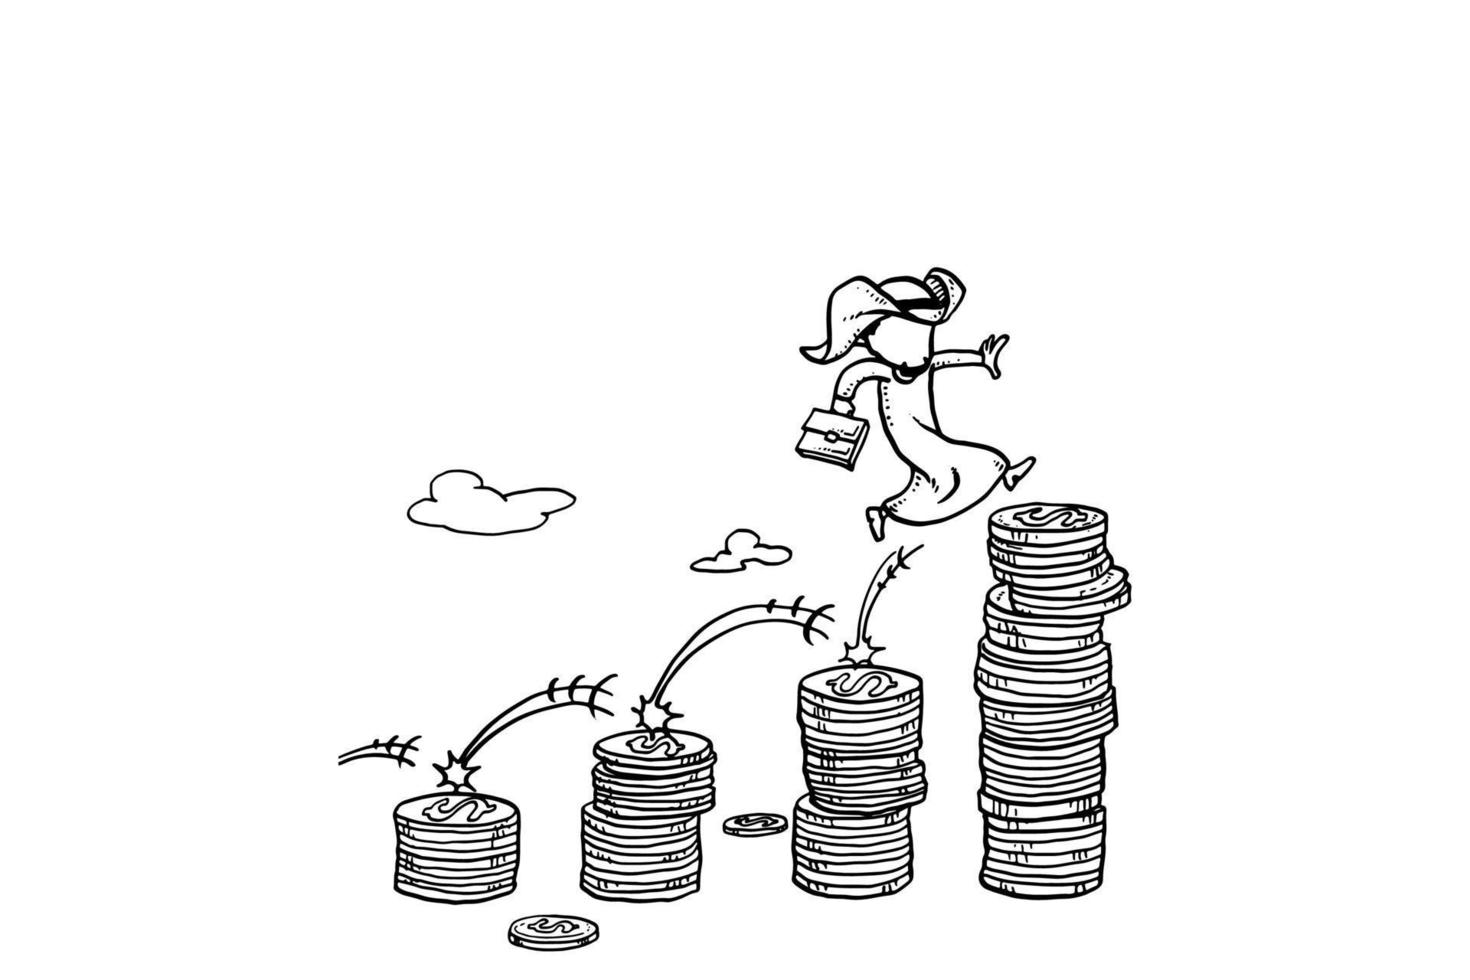 Arab businessman stepping several coin stack. Concept of investment growth. Cartoon vector illustration design on isolated background